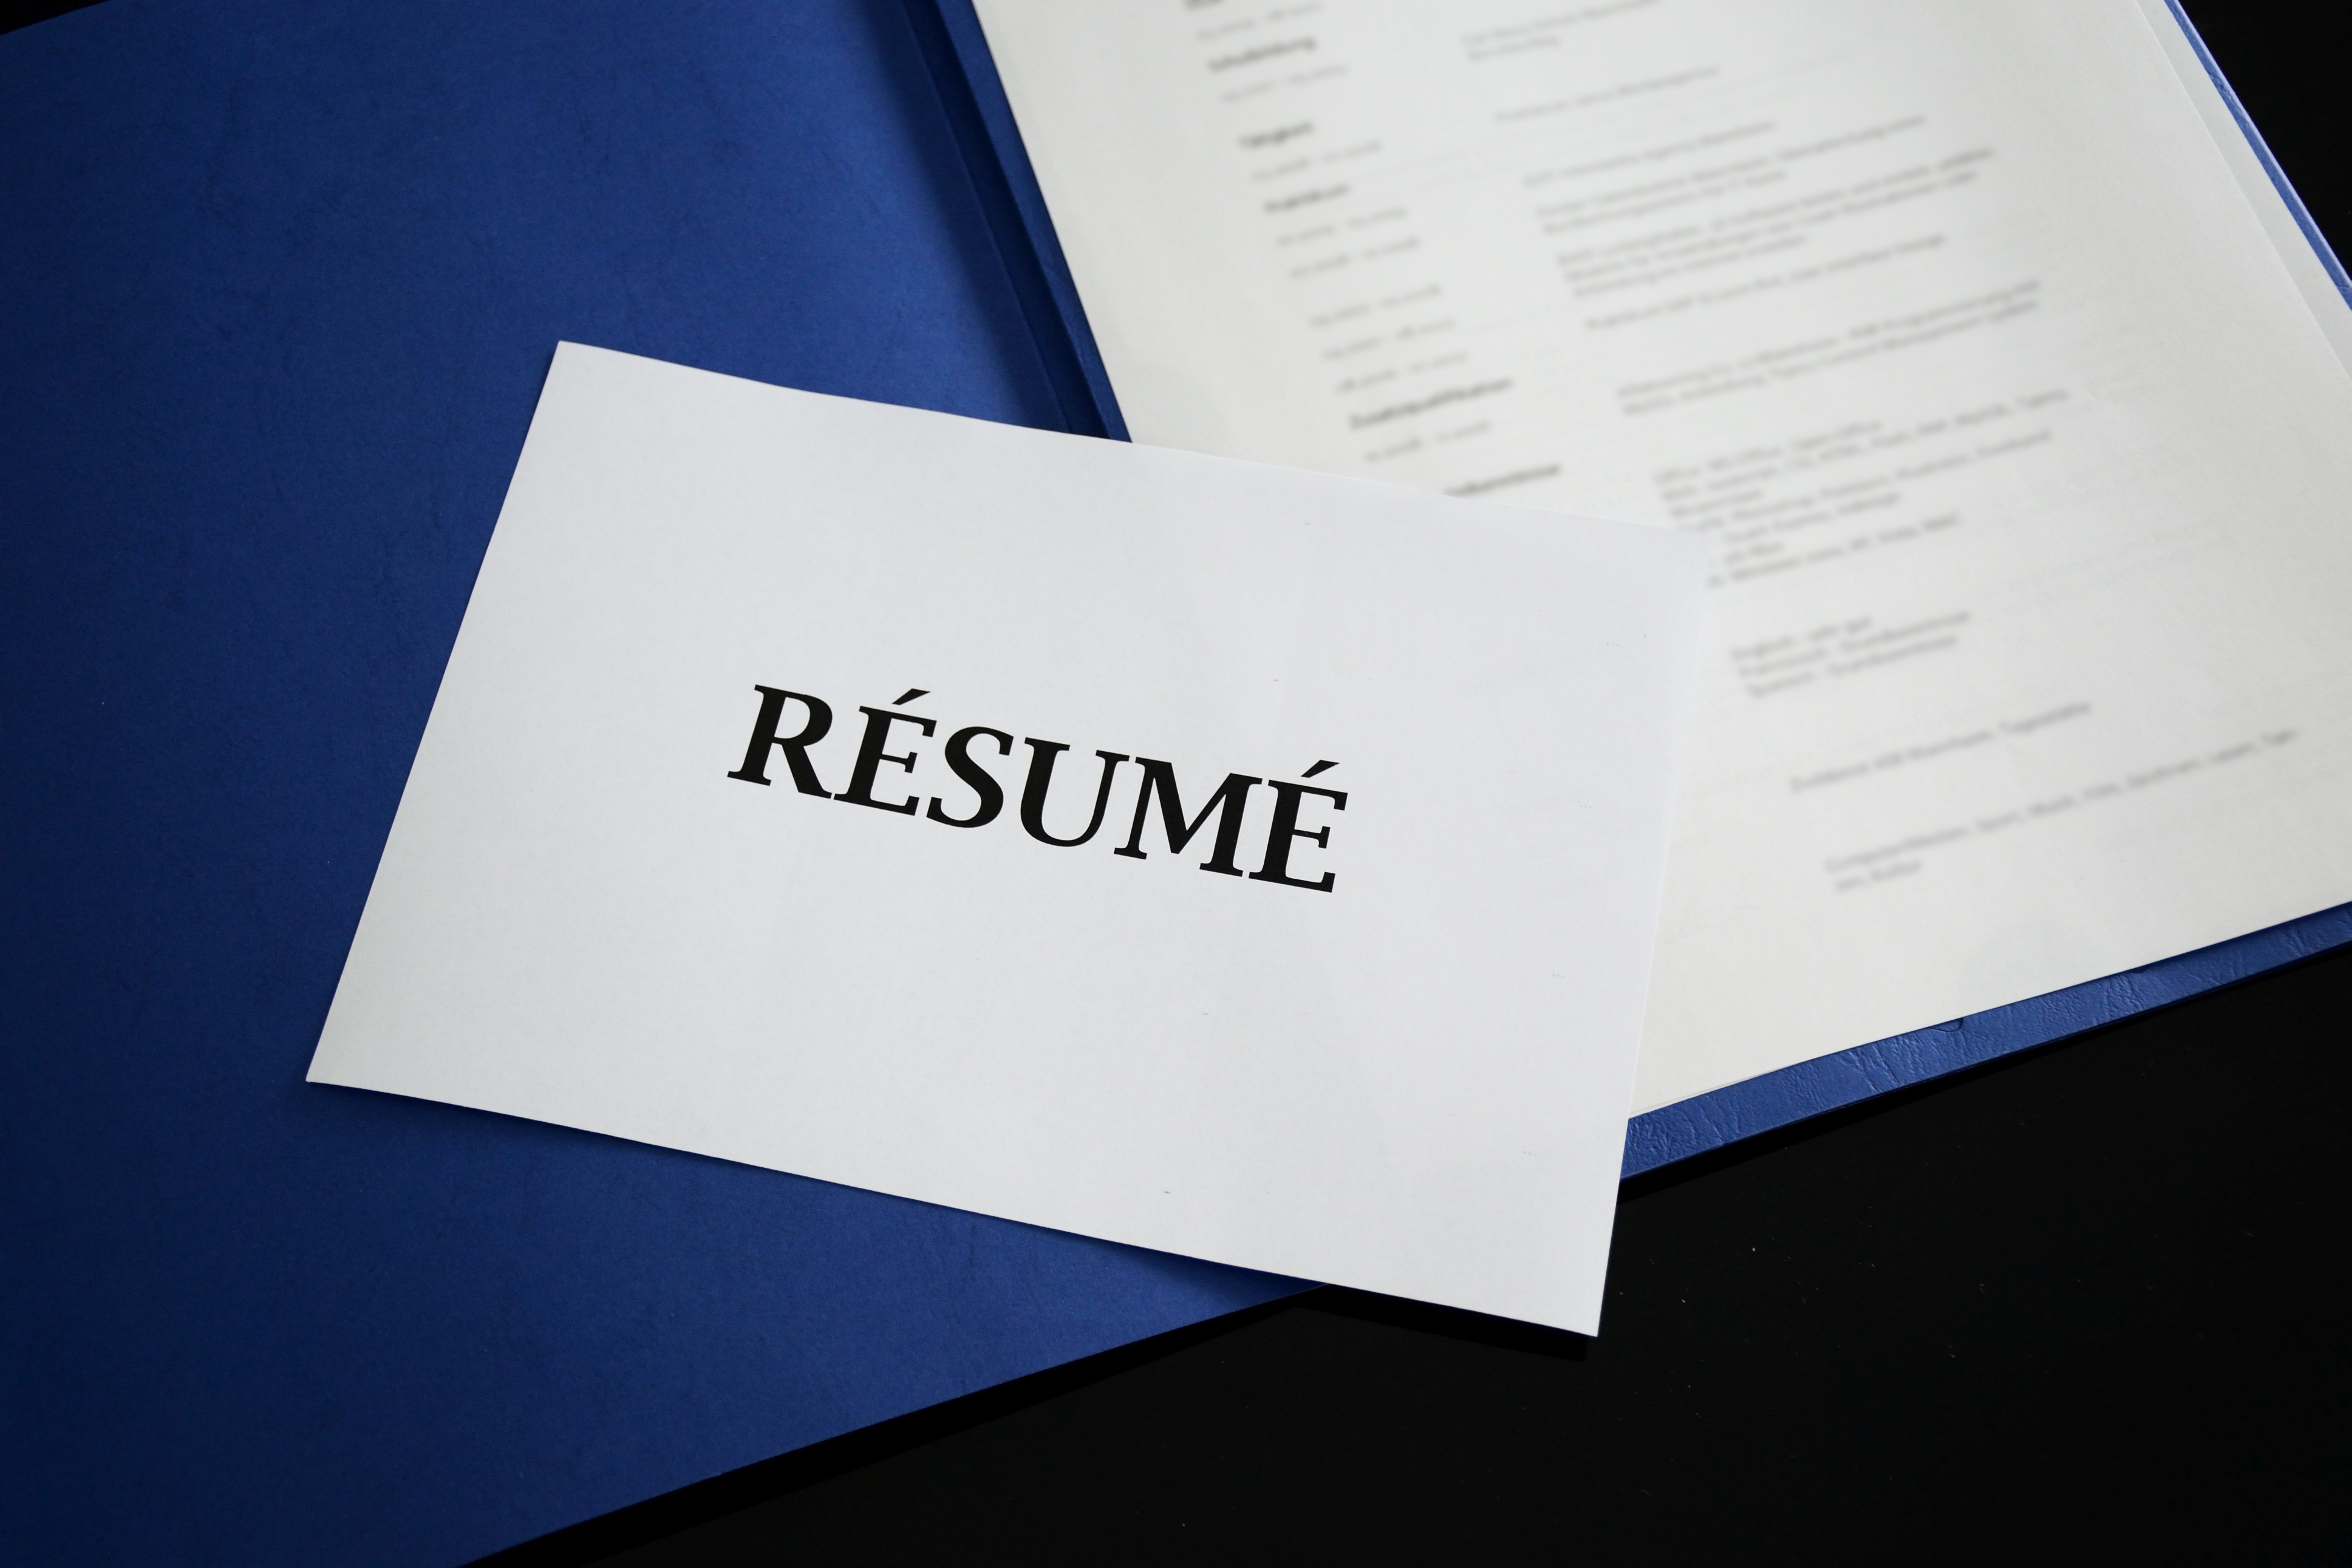 Writing a Great Resume